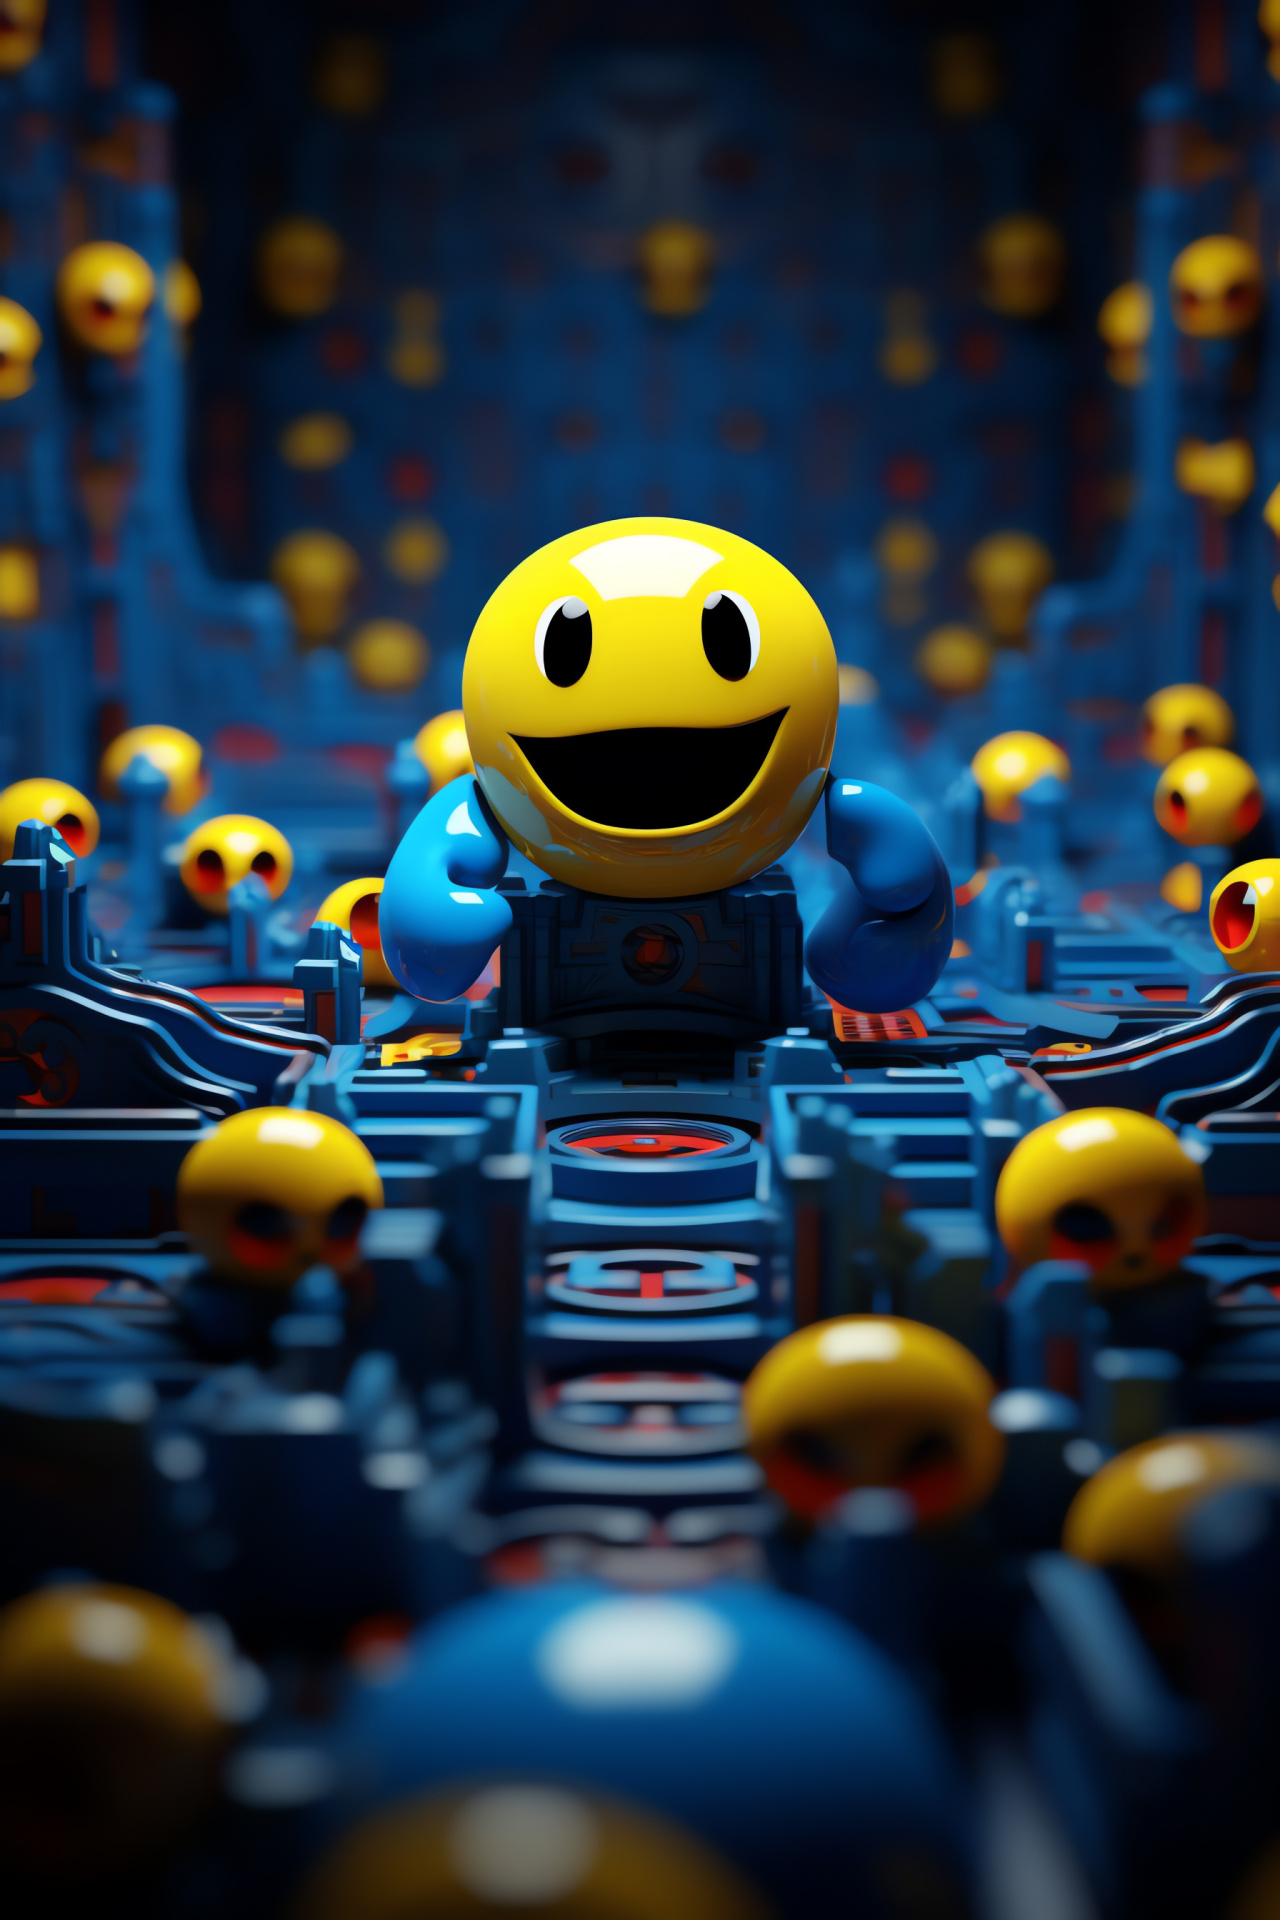 Pacman game, Pacworld universe, Arcade mascot, Classic gaming, Round protagonist, HD Phone Image